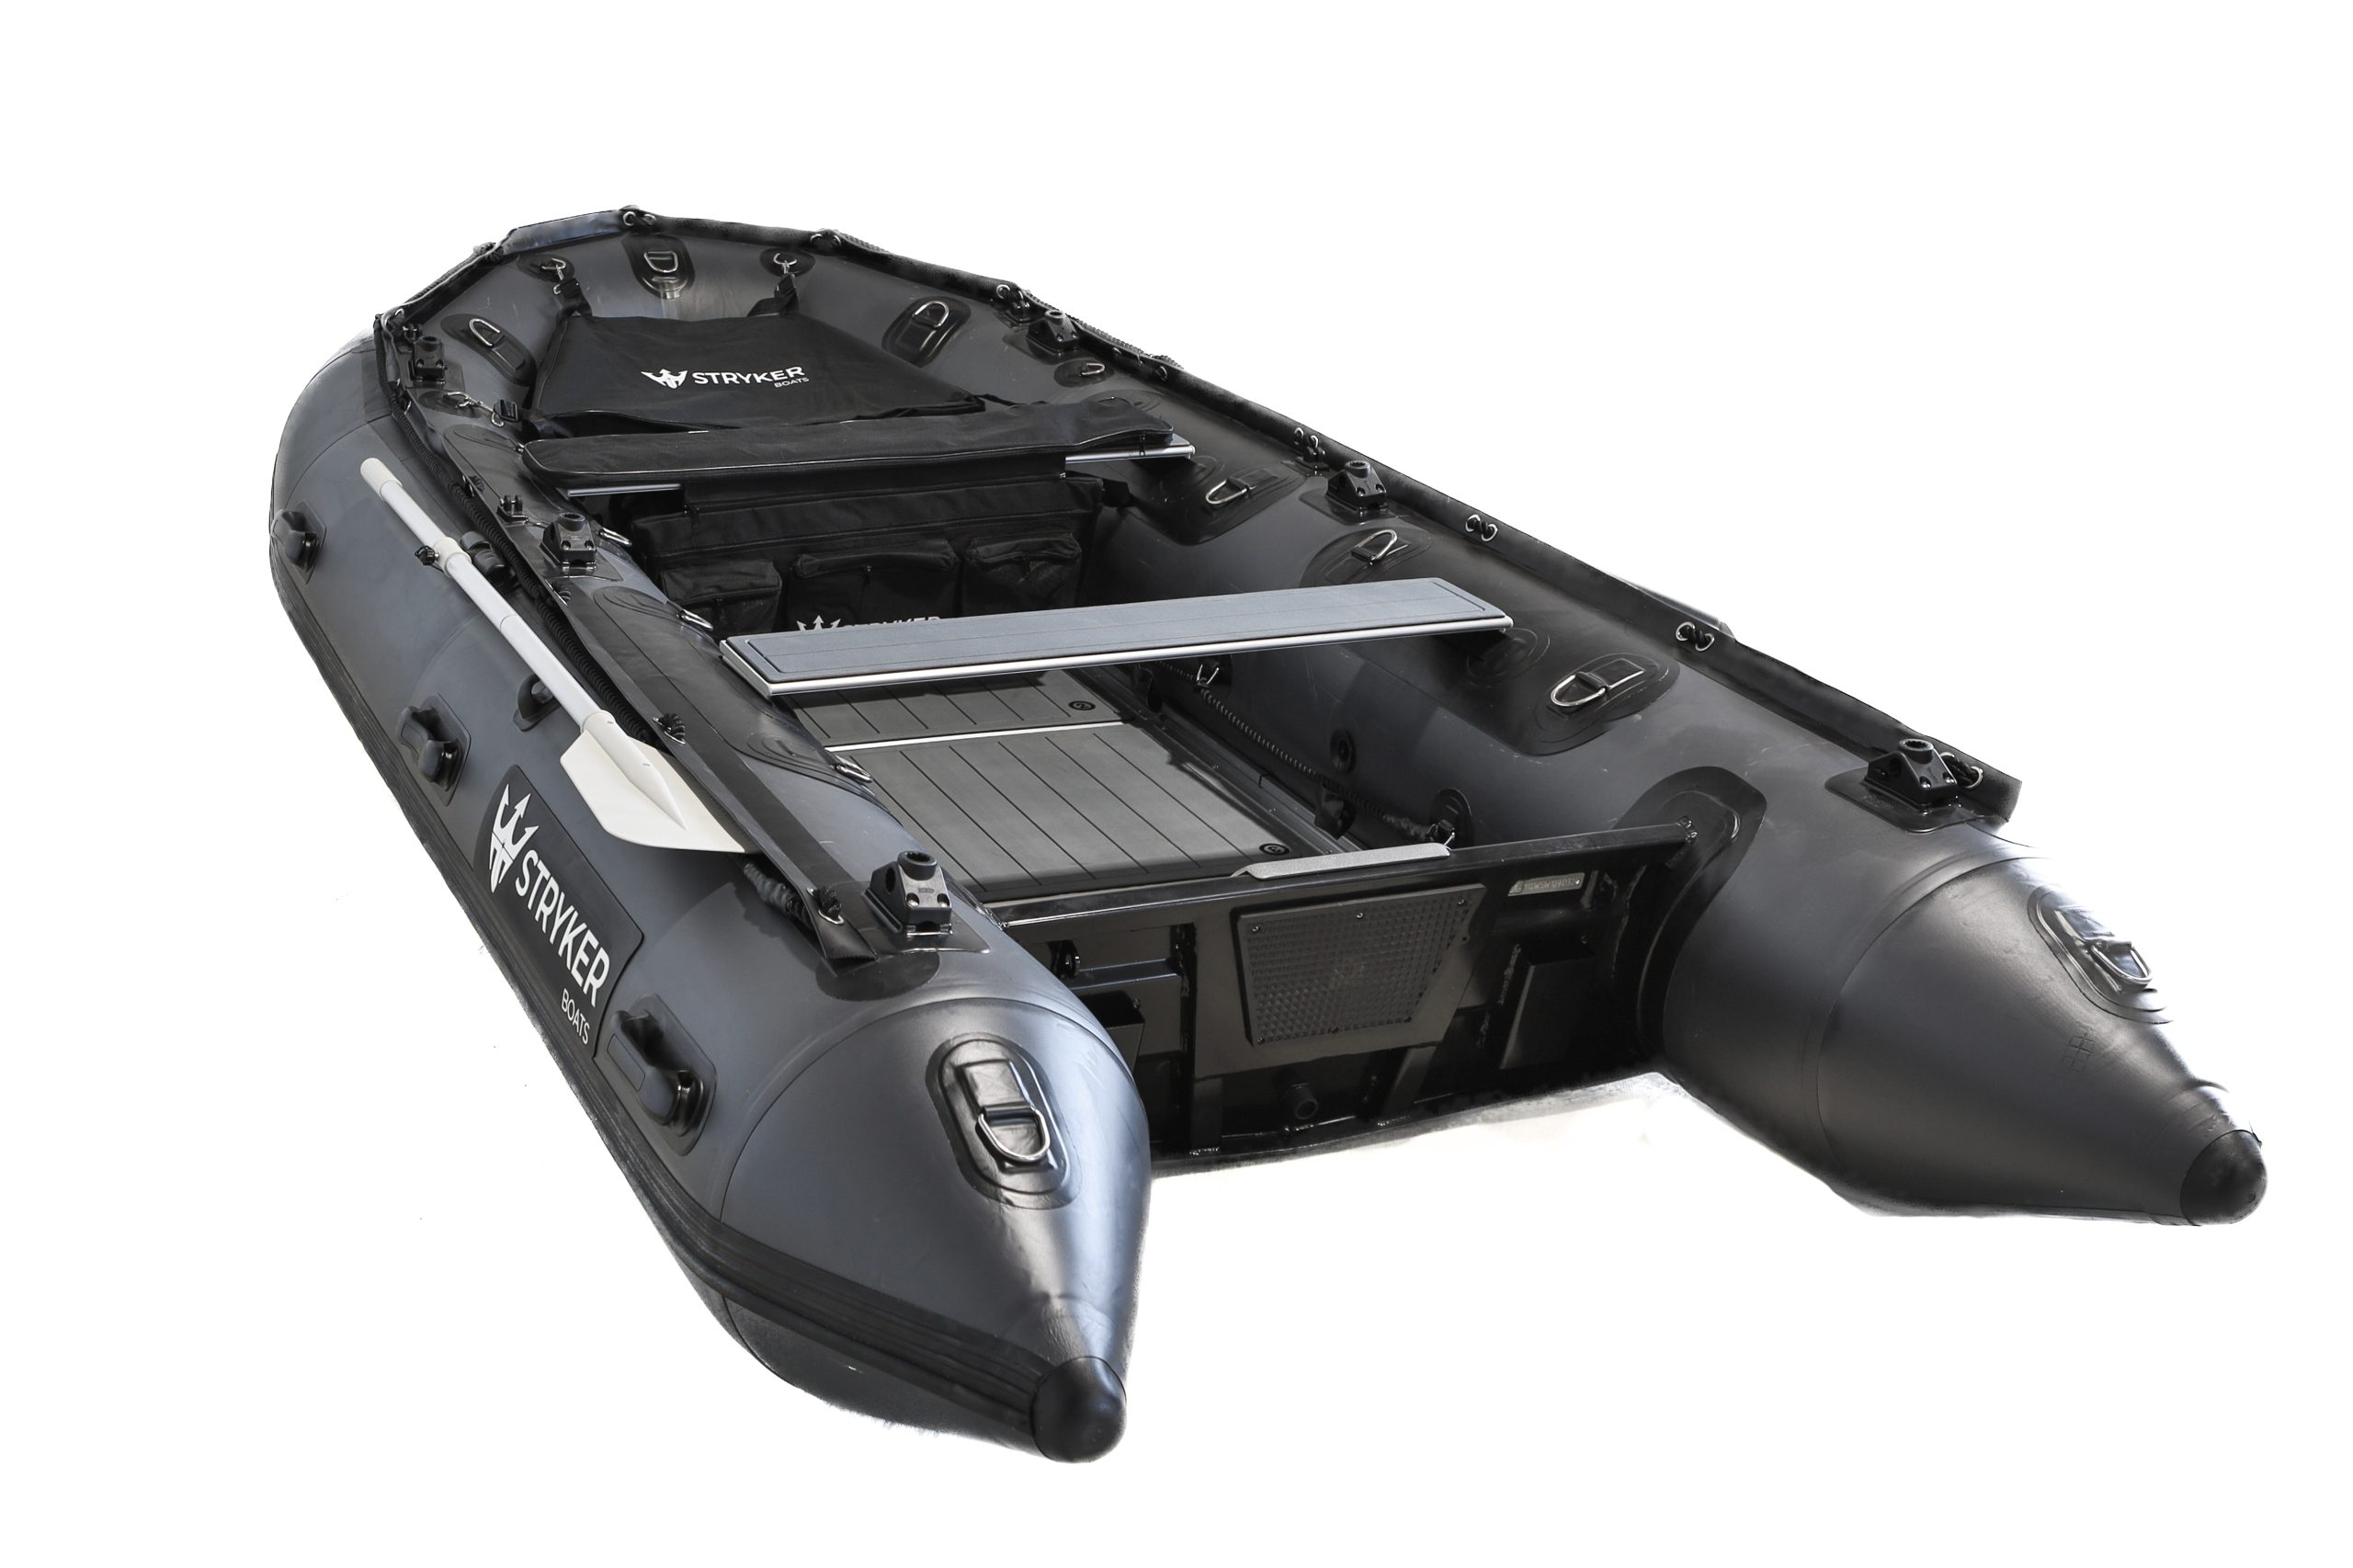 Stryker HD 380 (12' 5”) Inflatable Boat